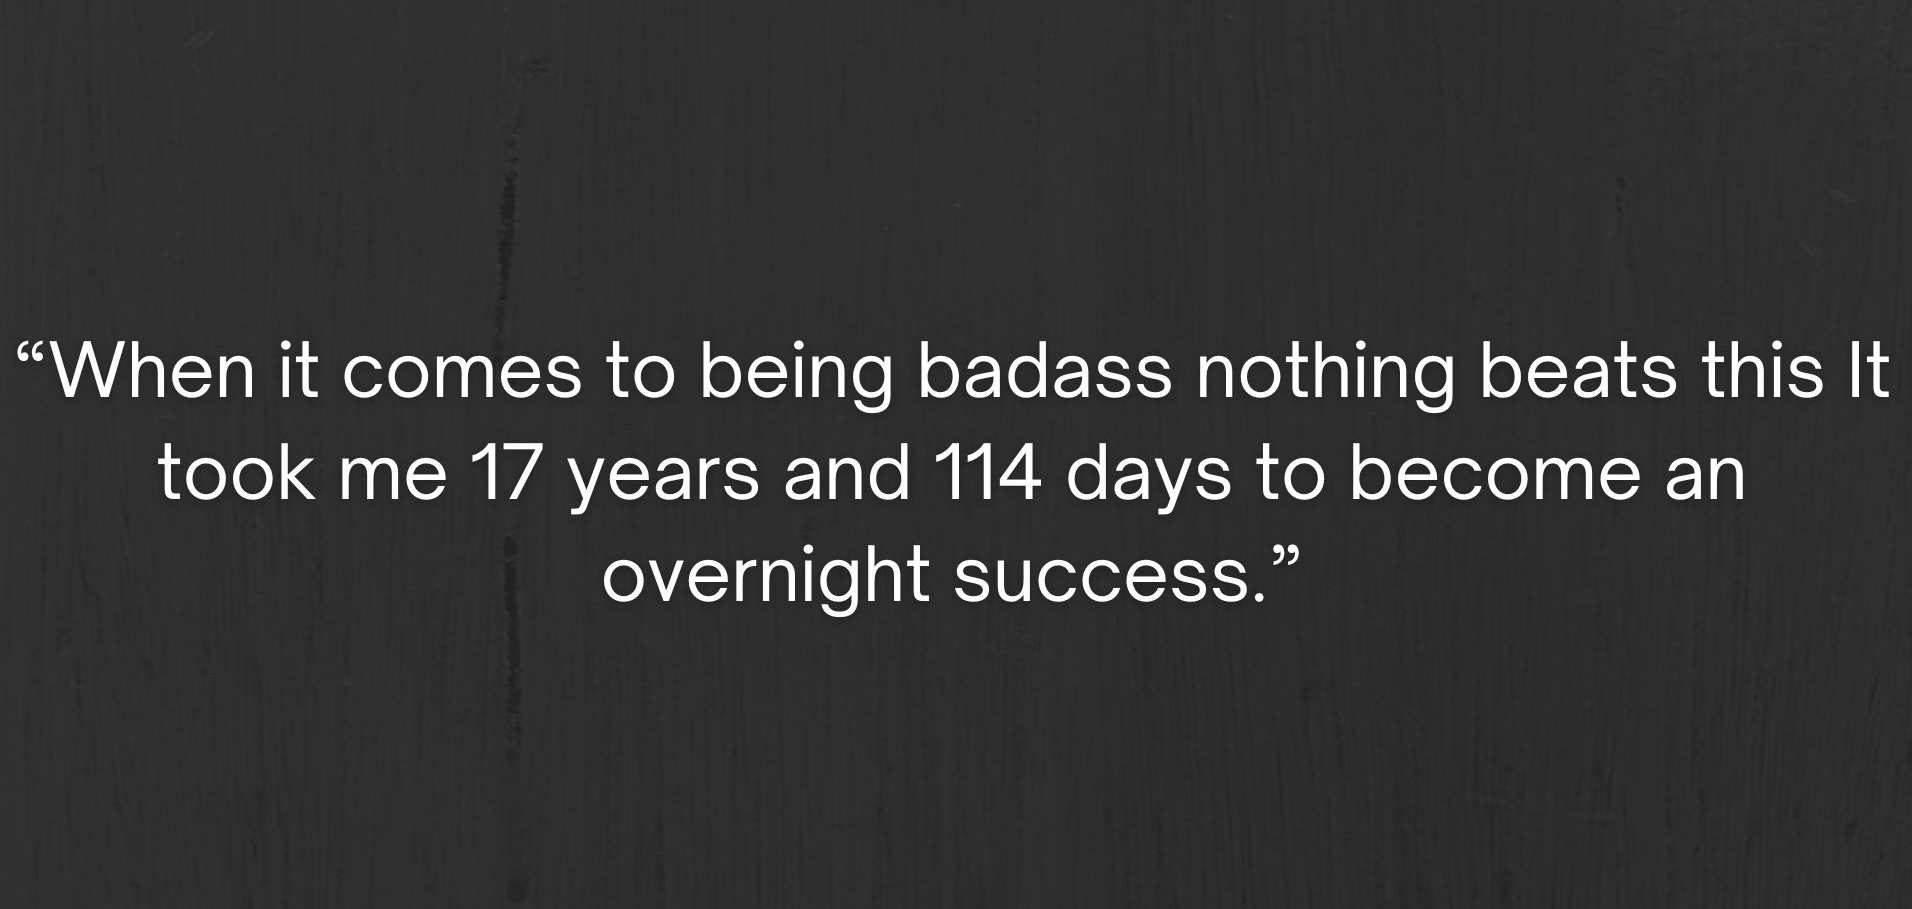 “When it comes to being badass nothing beats this It took me 17 years and 114 days to become an overnight success.”